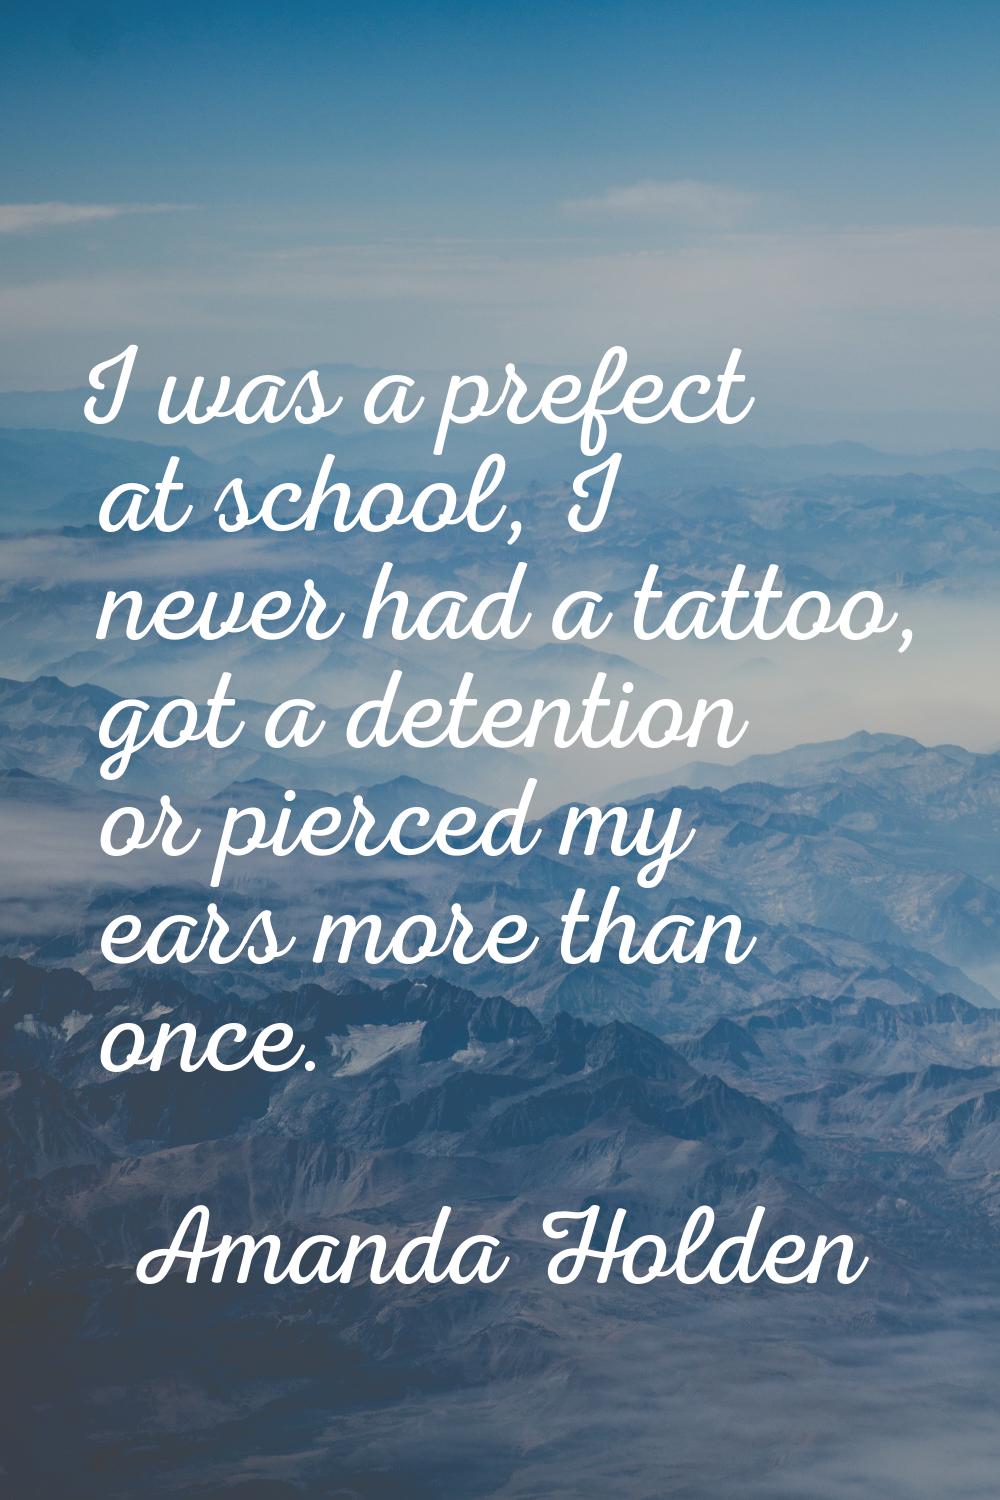 I was a prefect at school, I never had a tattoo, got a detention or pierced my ears more than once.